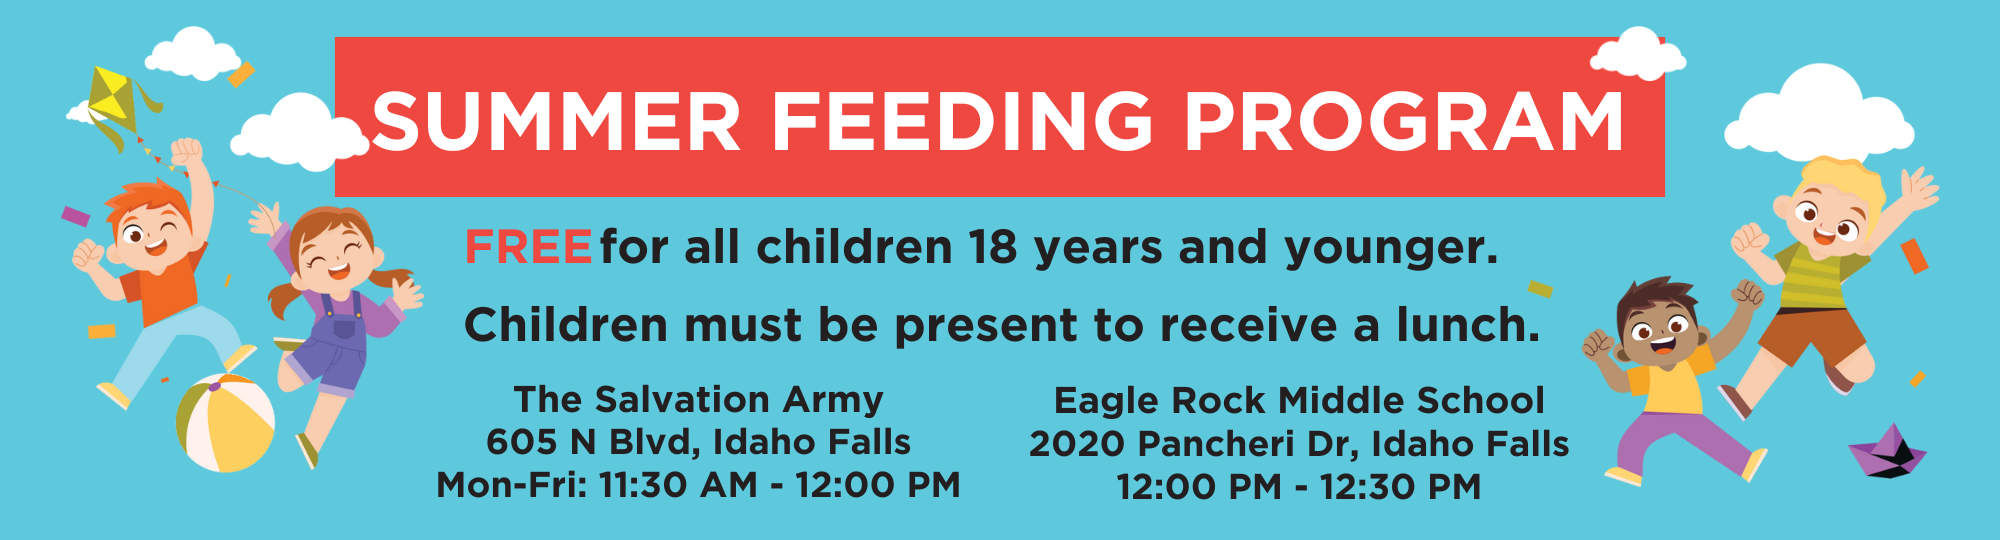 Summer feeding program. Free for all children ages 18 and younger. Children must be present to receive a lunch.